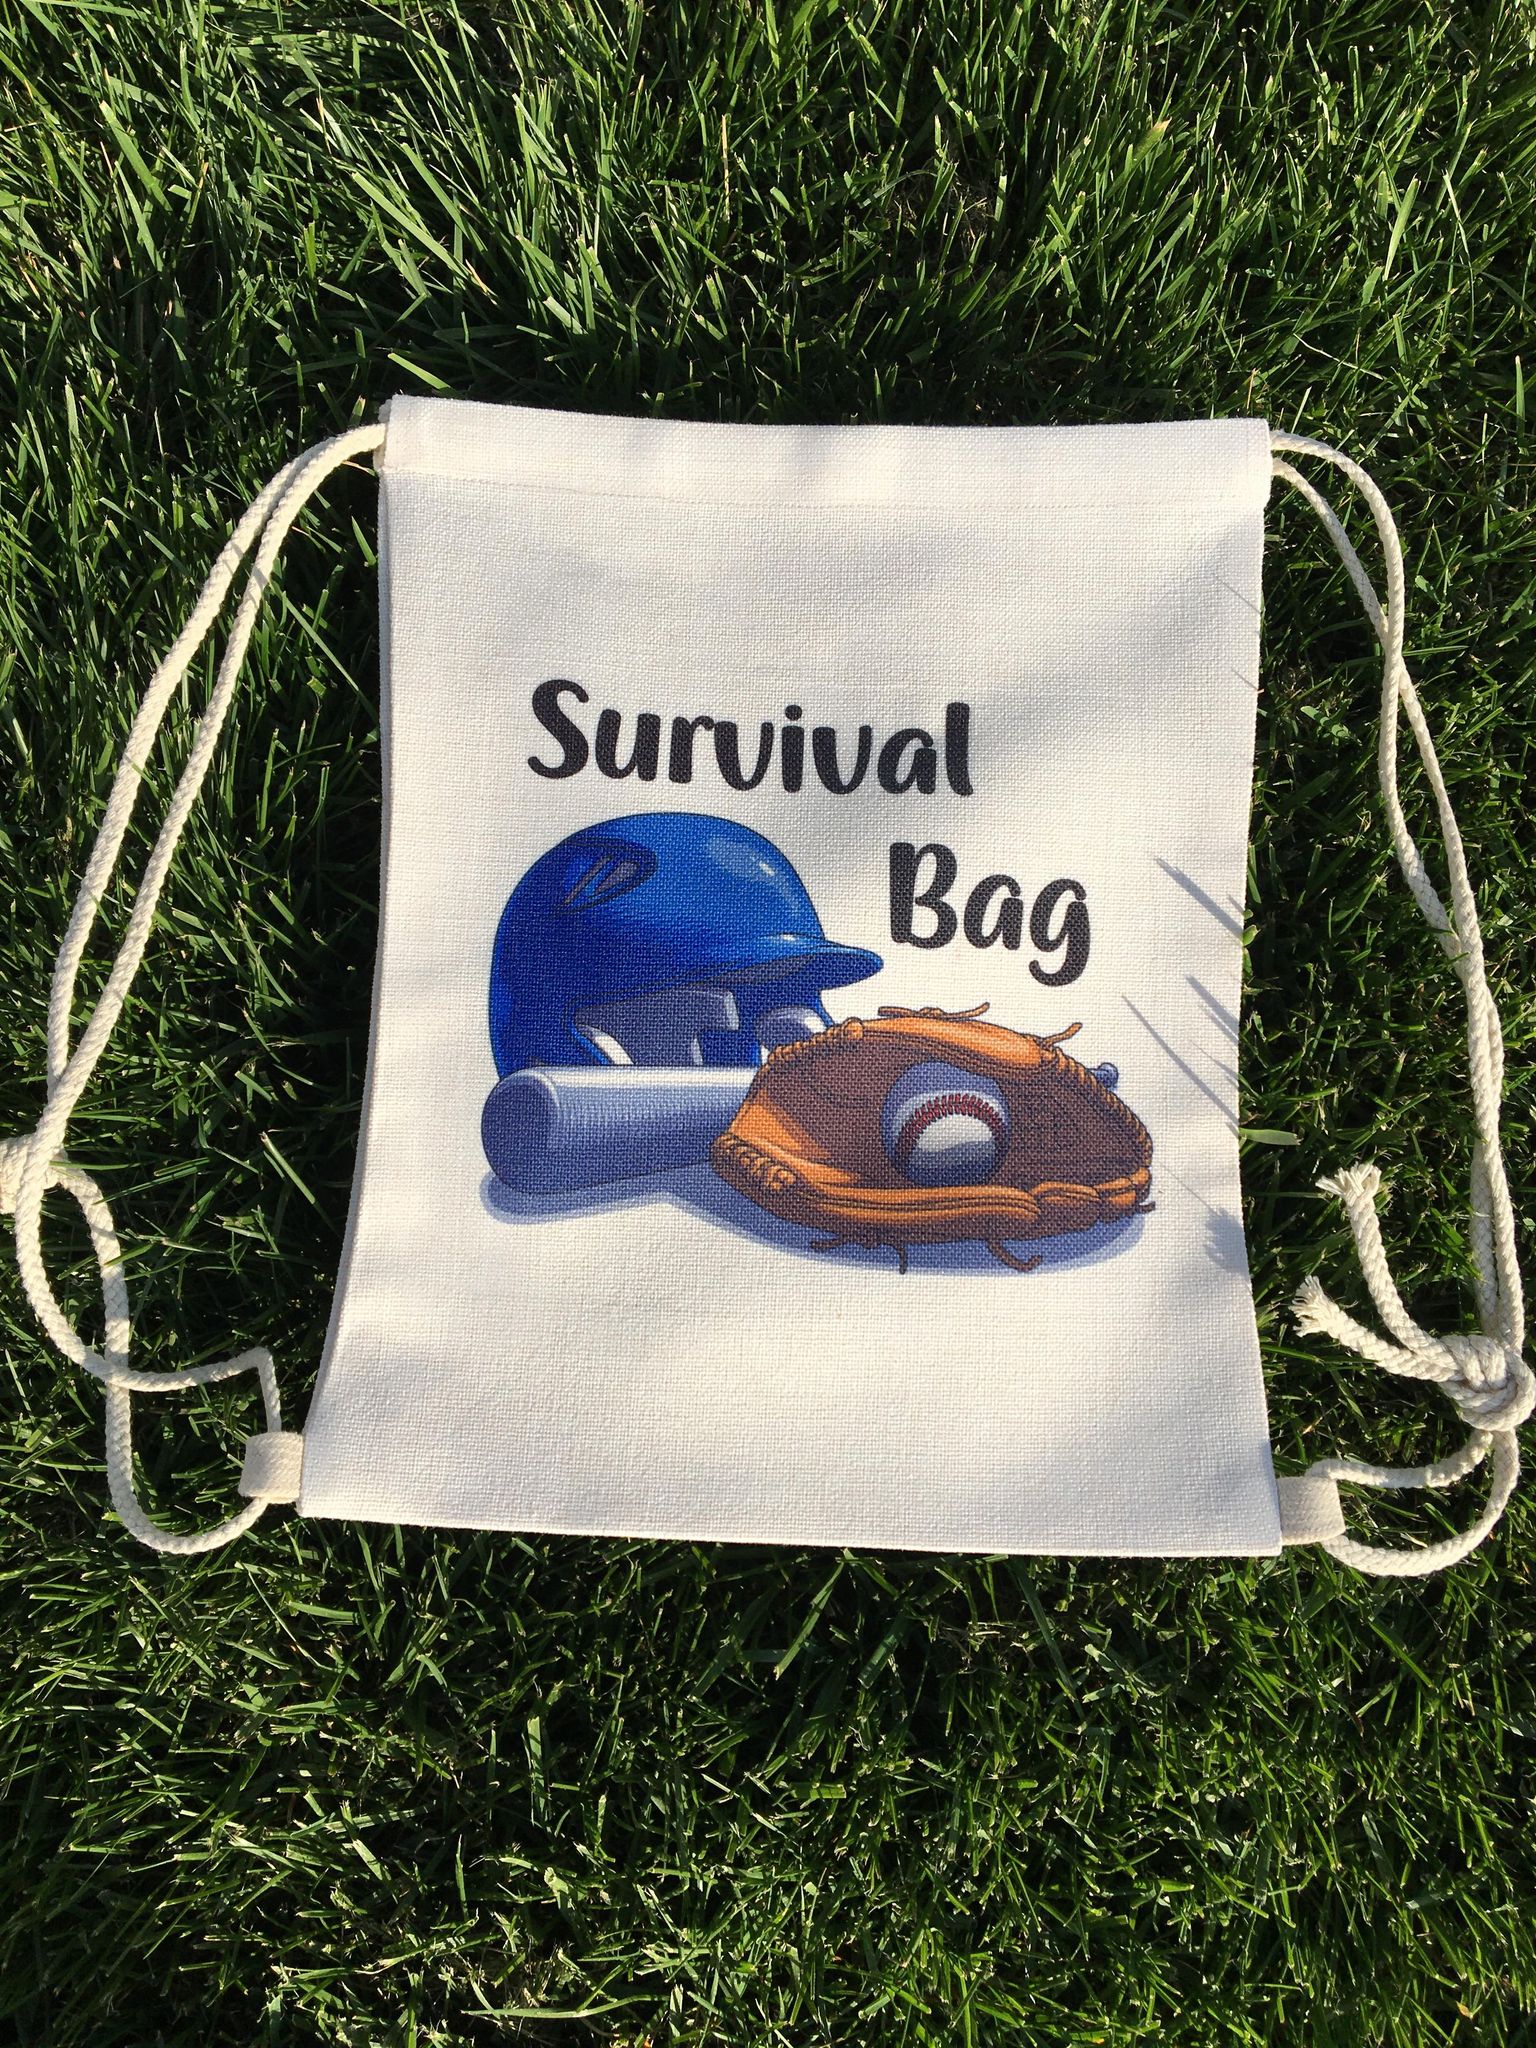 Survival Backpack made with sublimation printing